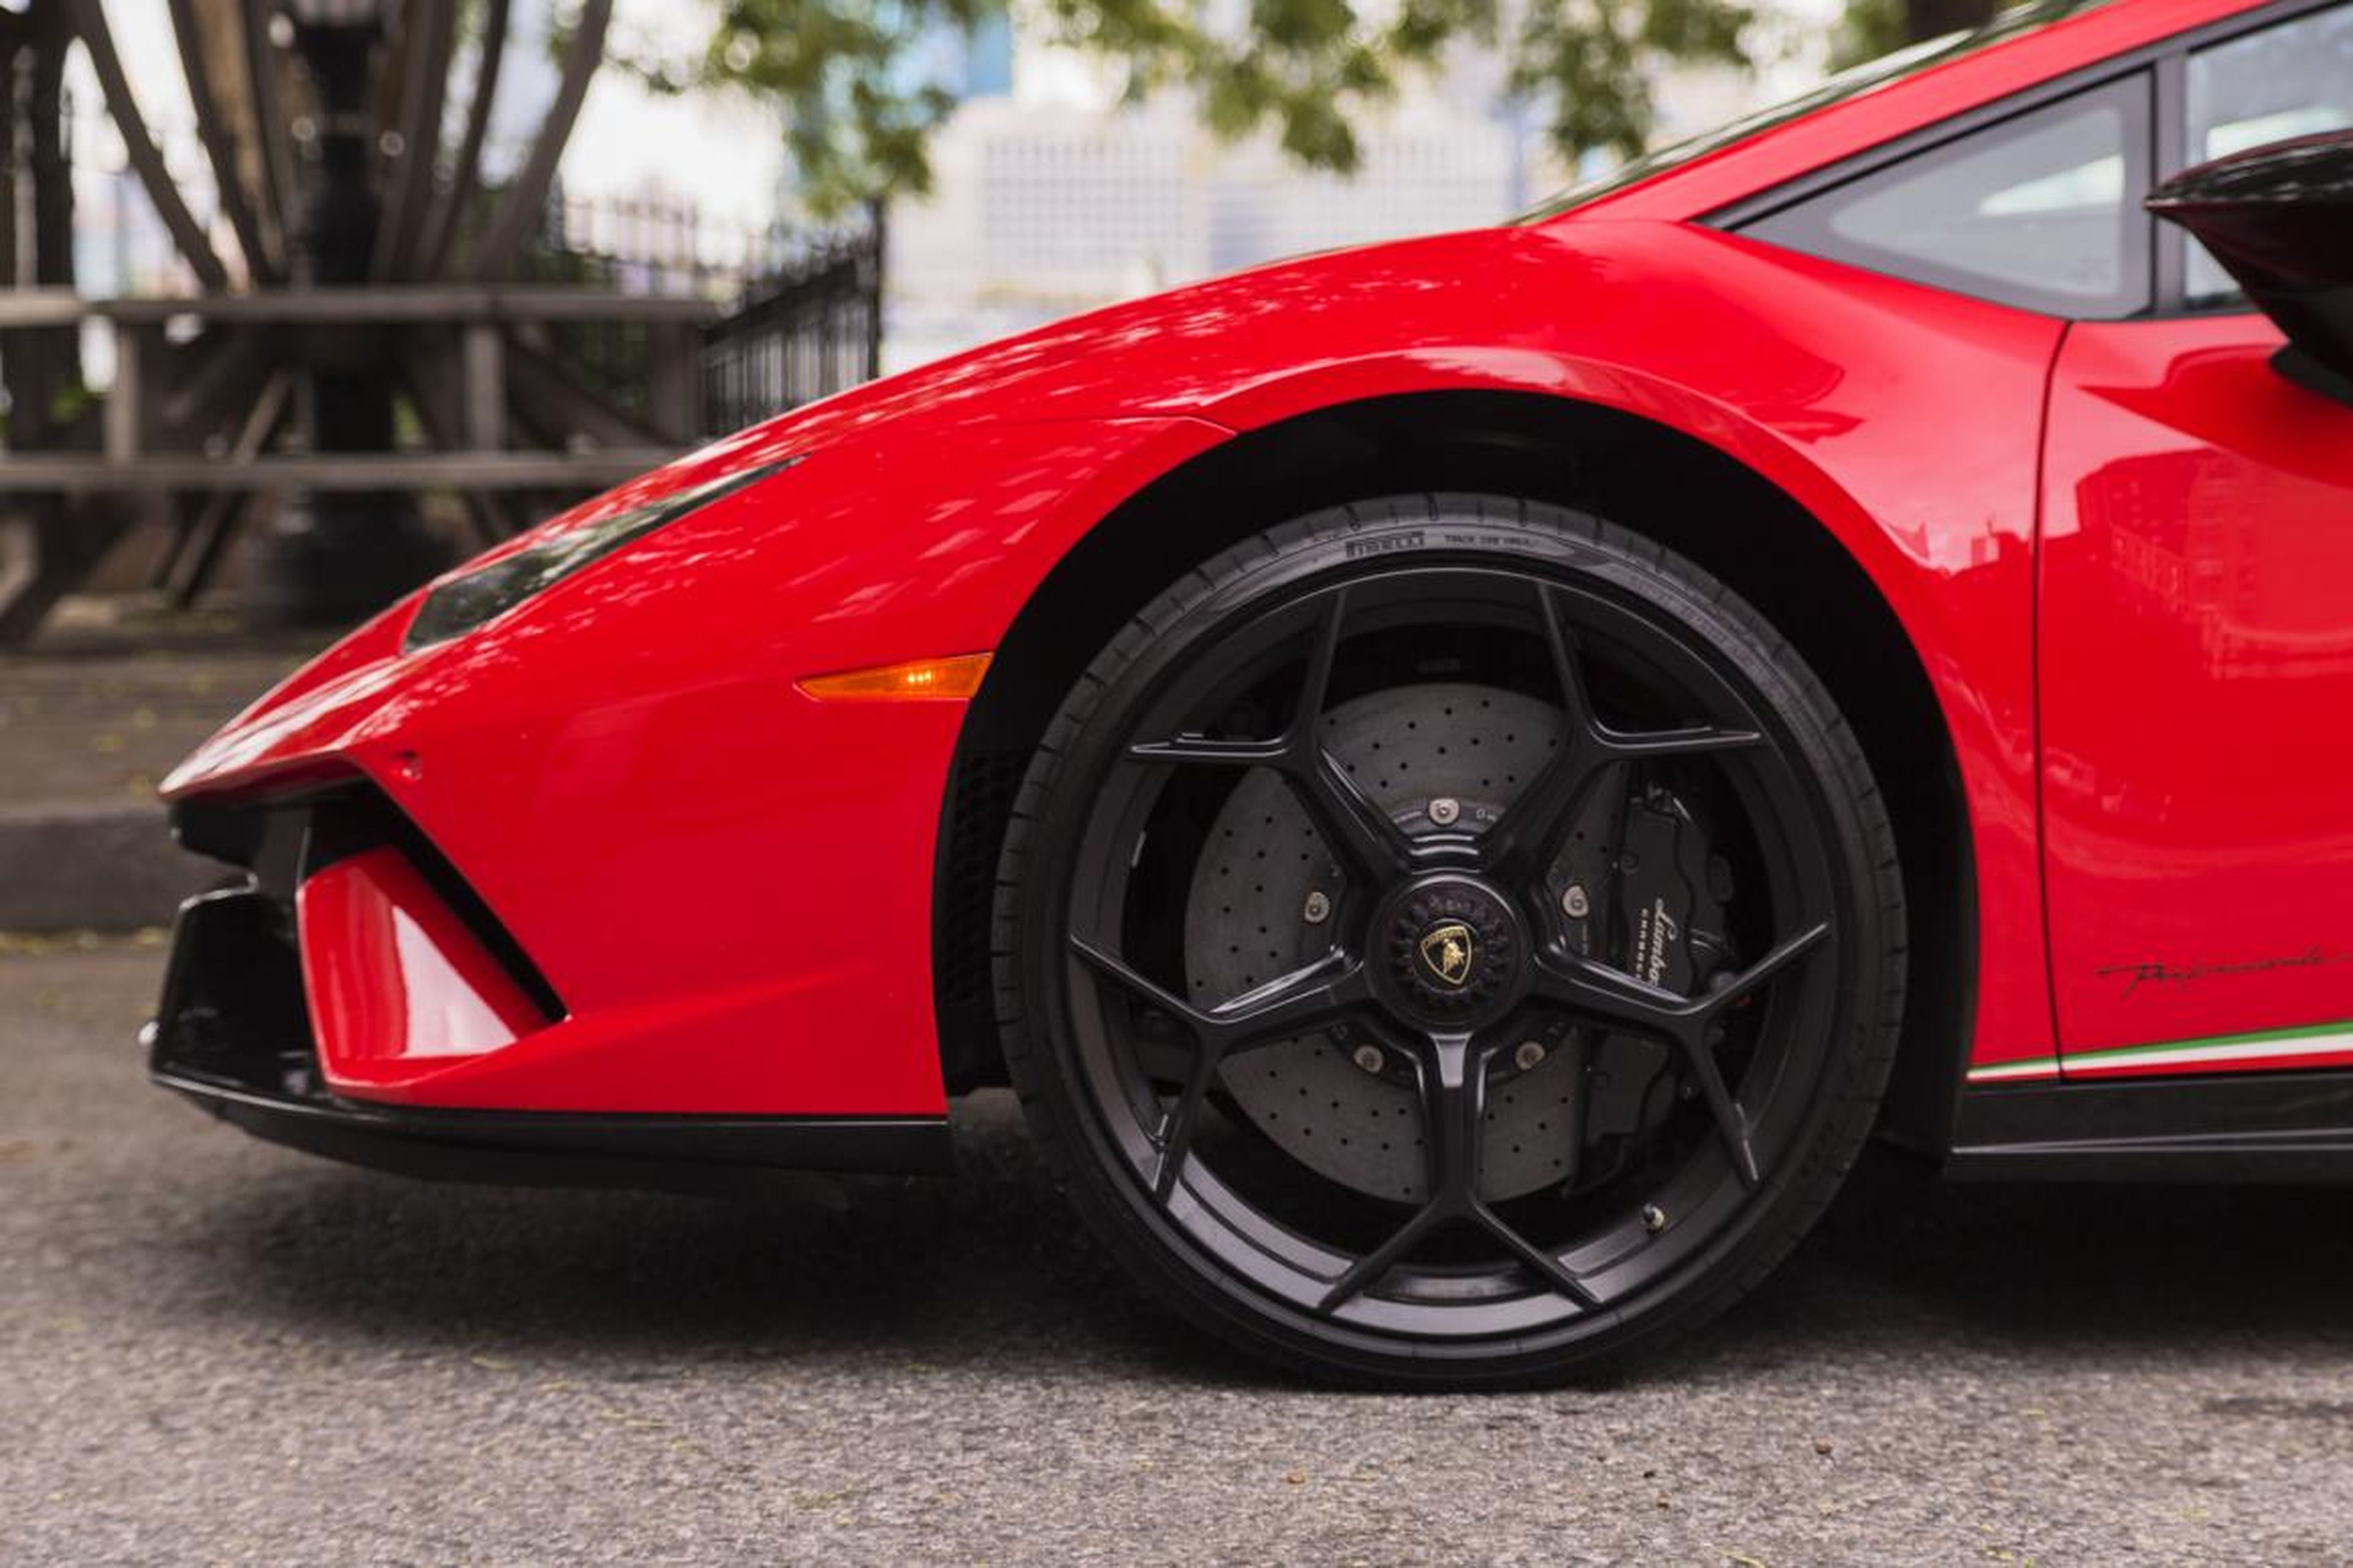 The Huracán Performante sports ventilated carbon-ceramic brakes and meaty black calipers. A necessity, to slow the Lambo from a top speed of 202 mph.